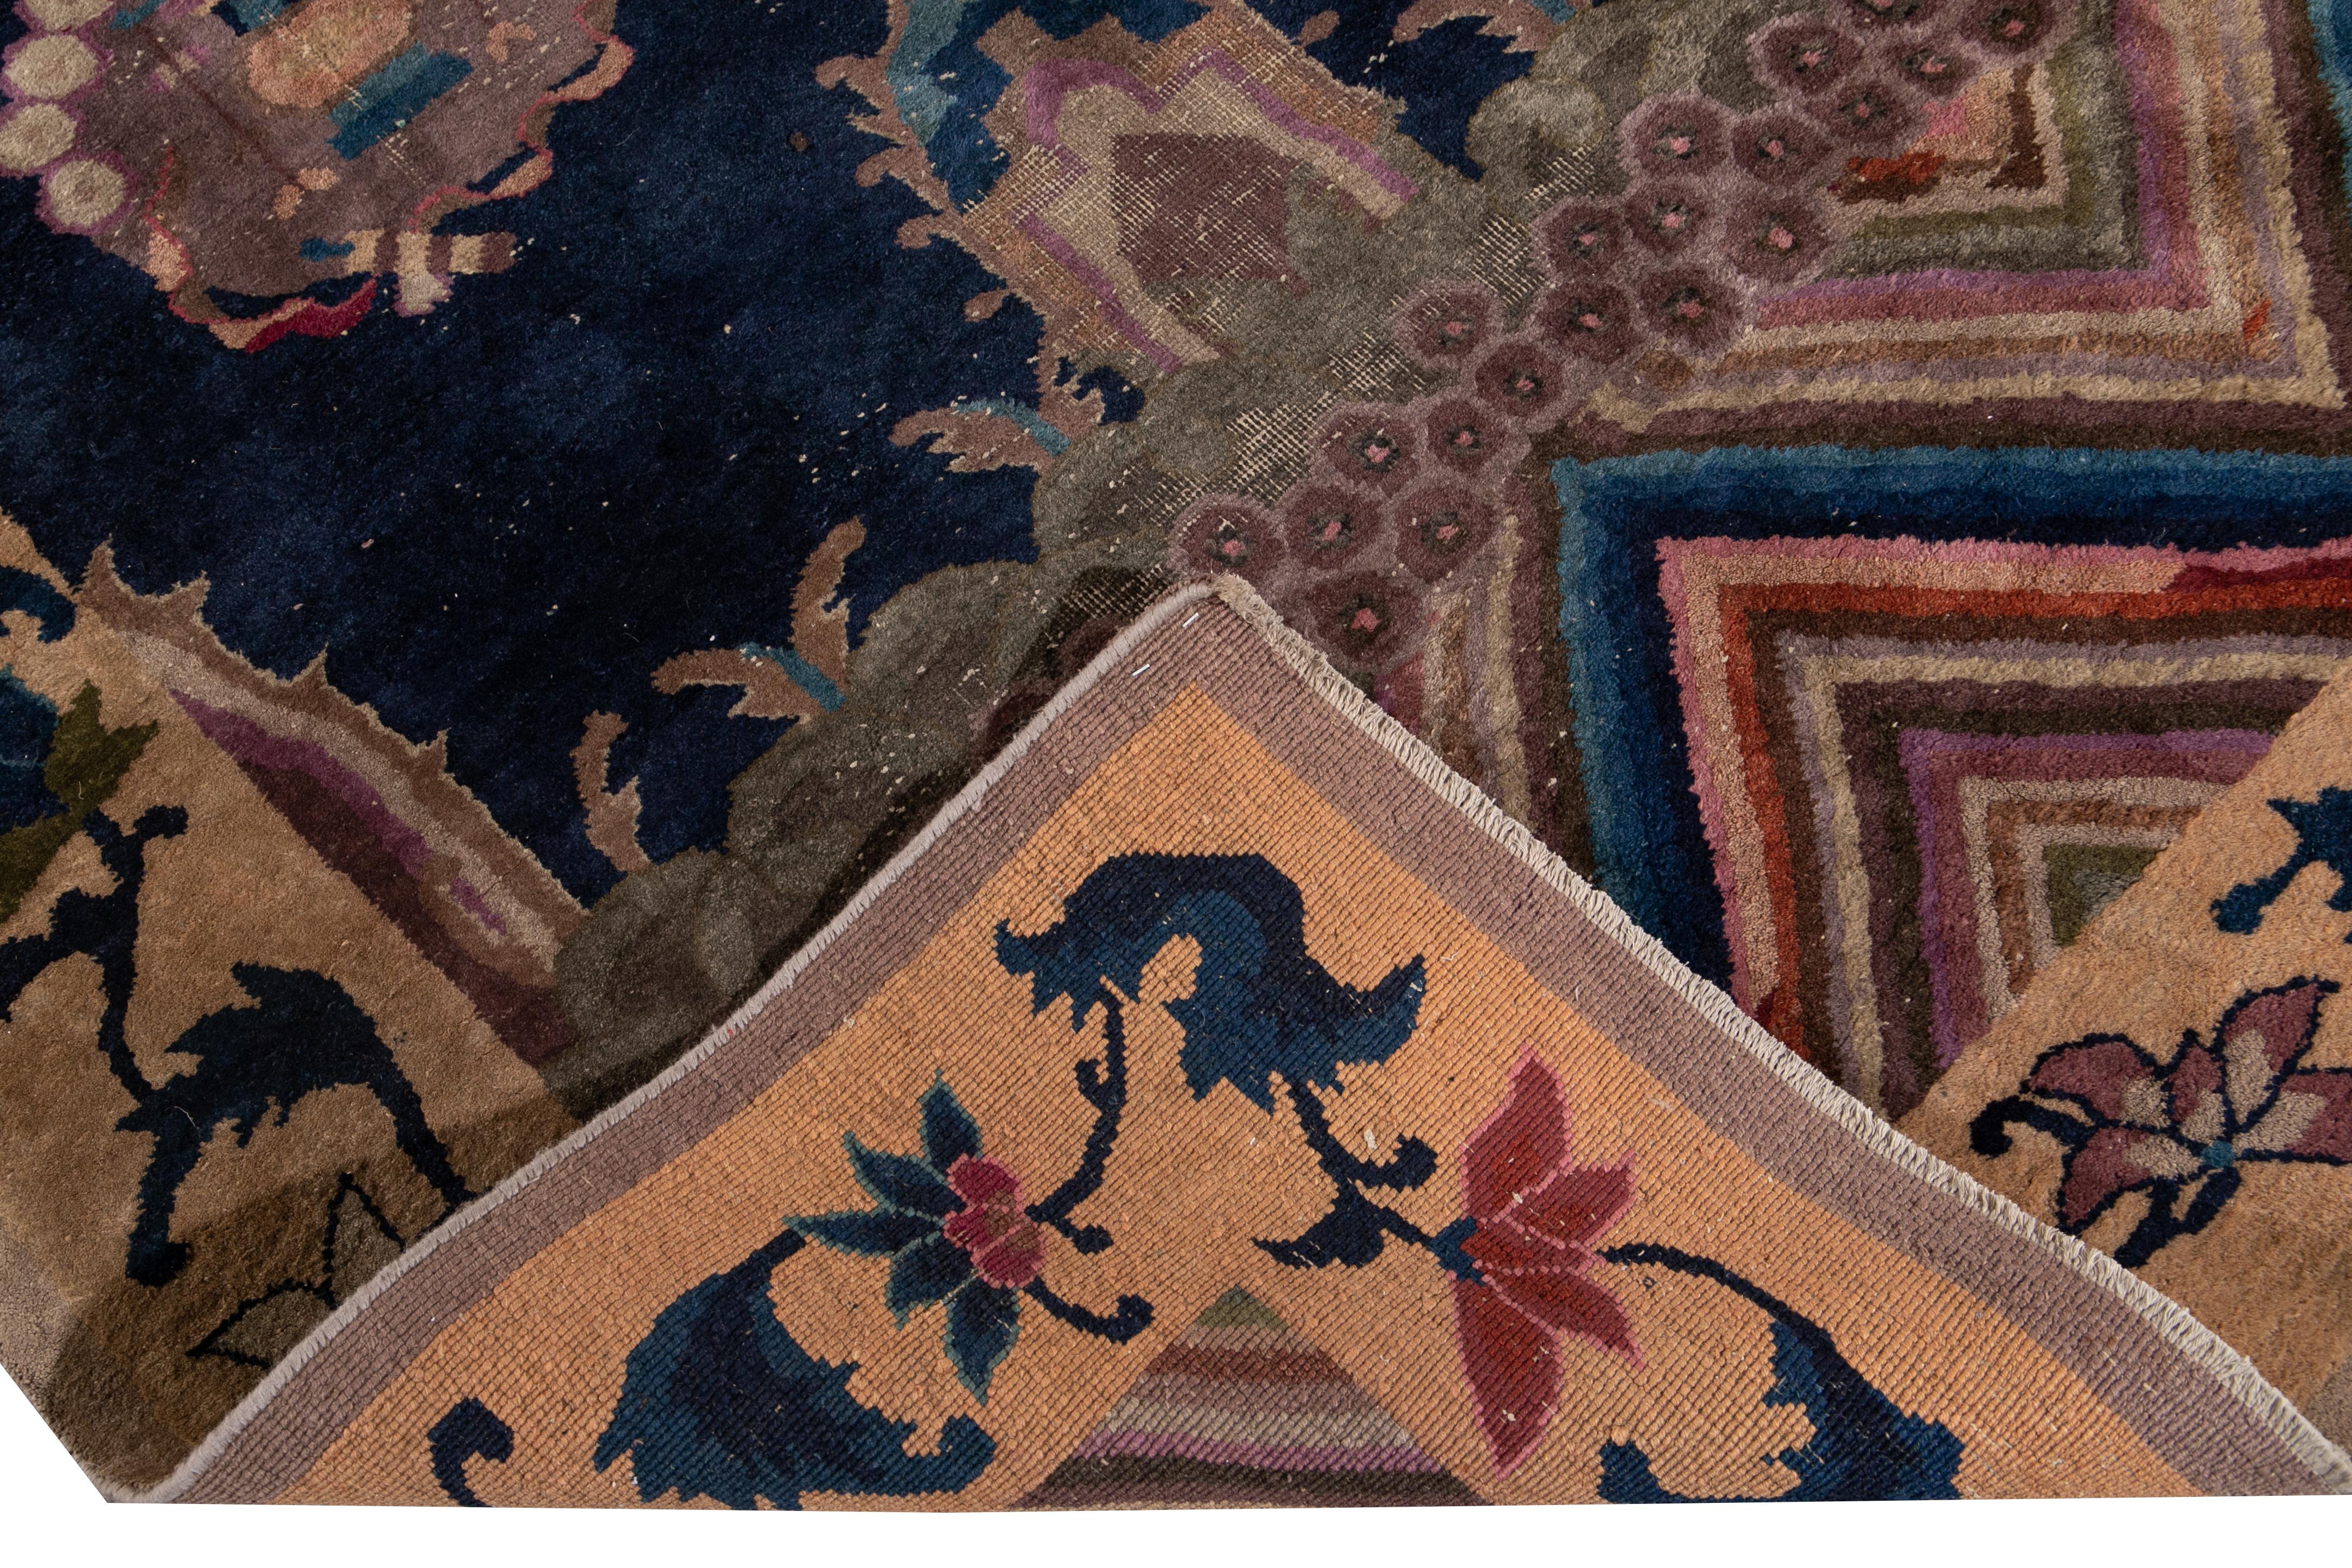 Beautiful antique Art Deco Chinese hand knotted wool rug with Navy-blue field. This rug has a frame of beige and accents of red, purple, and green in a gorgeous all-over Chinese floral design.

This rug measures 5'9